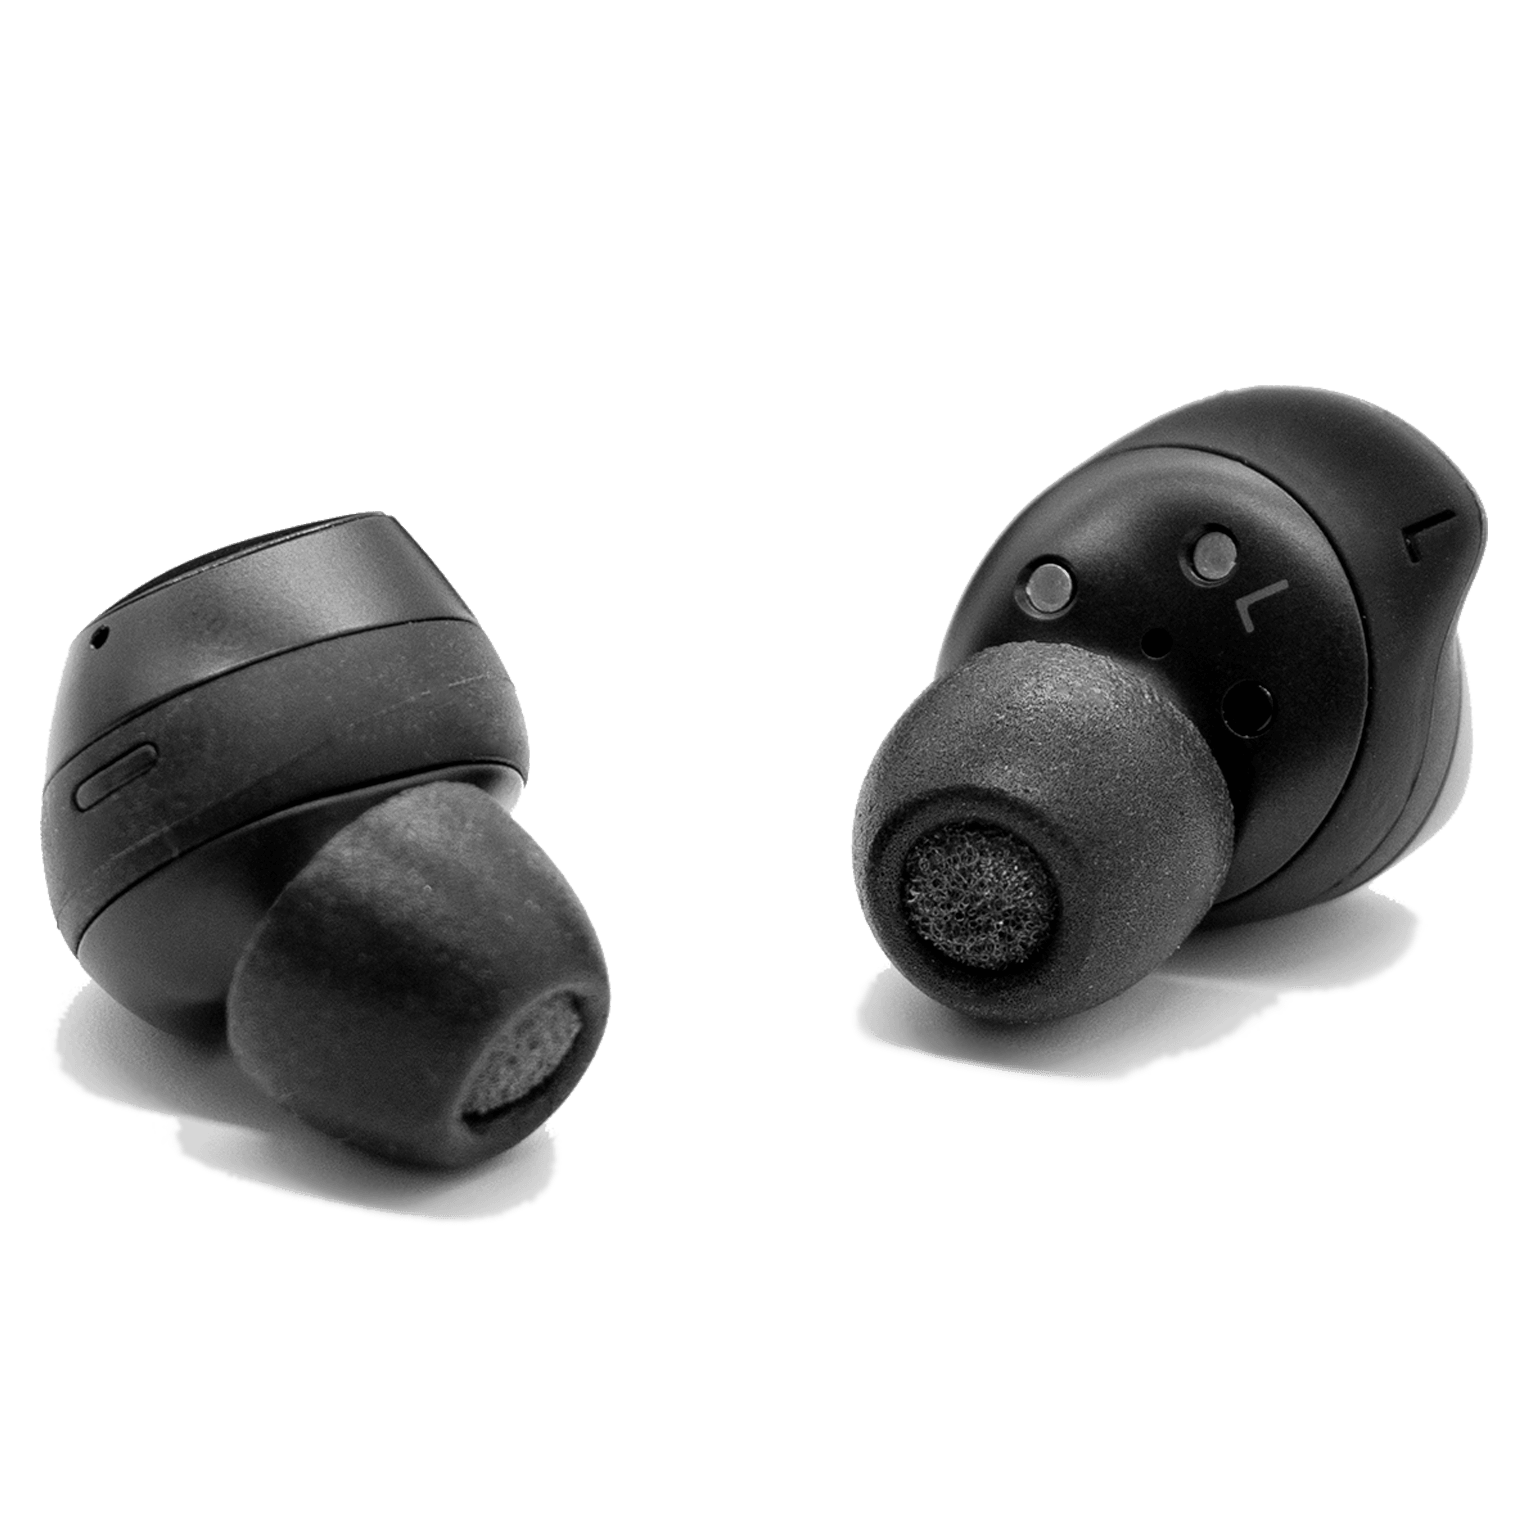 Samsung's Galaxy Buds2 Pro topped my AirPods for running